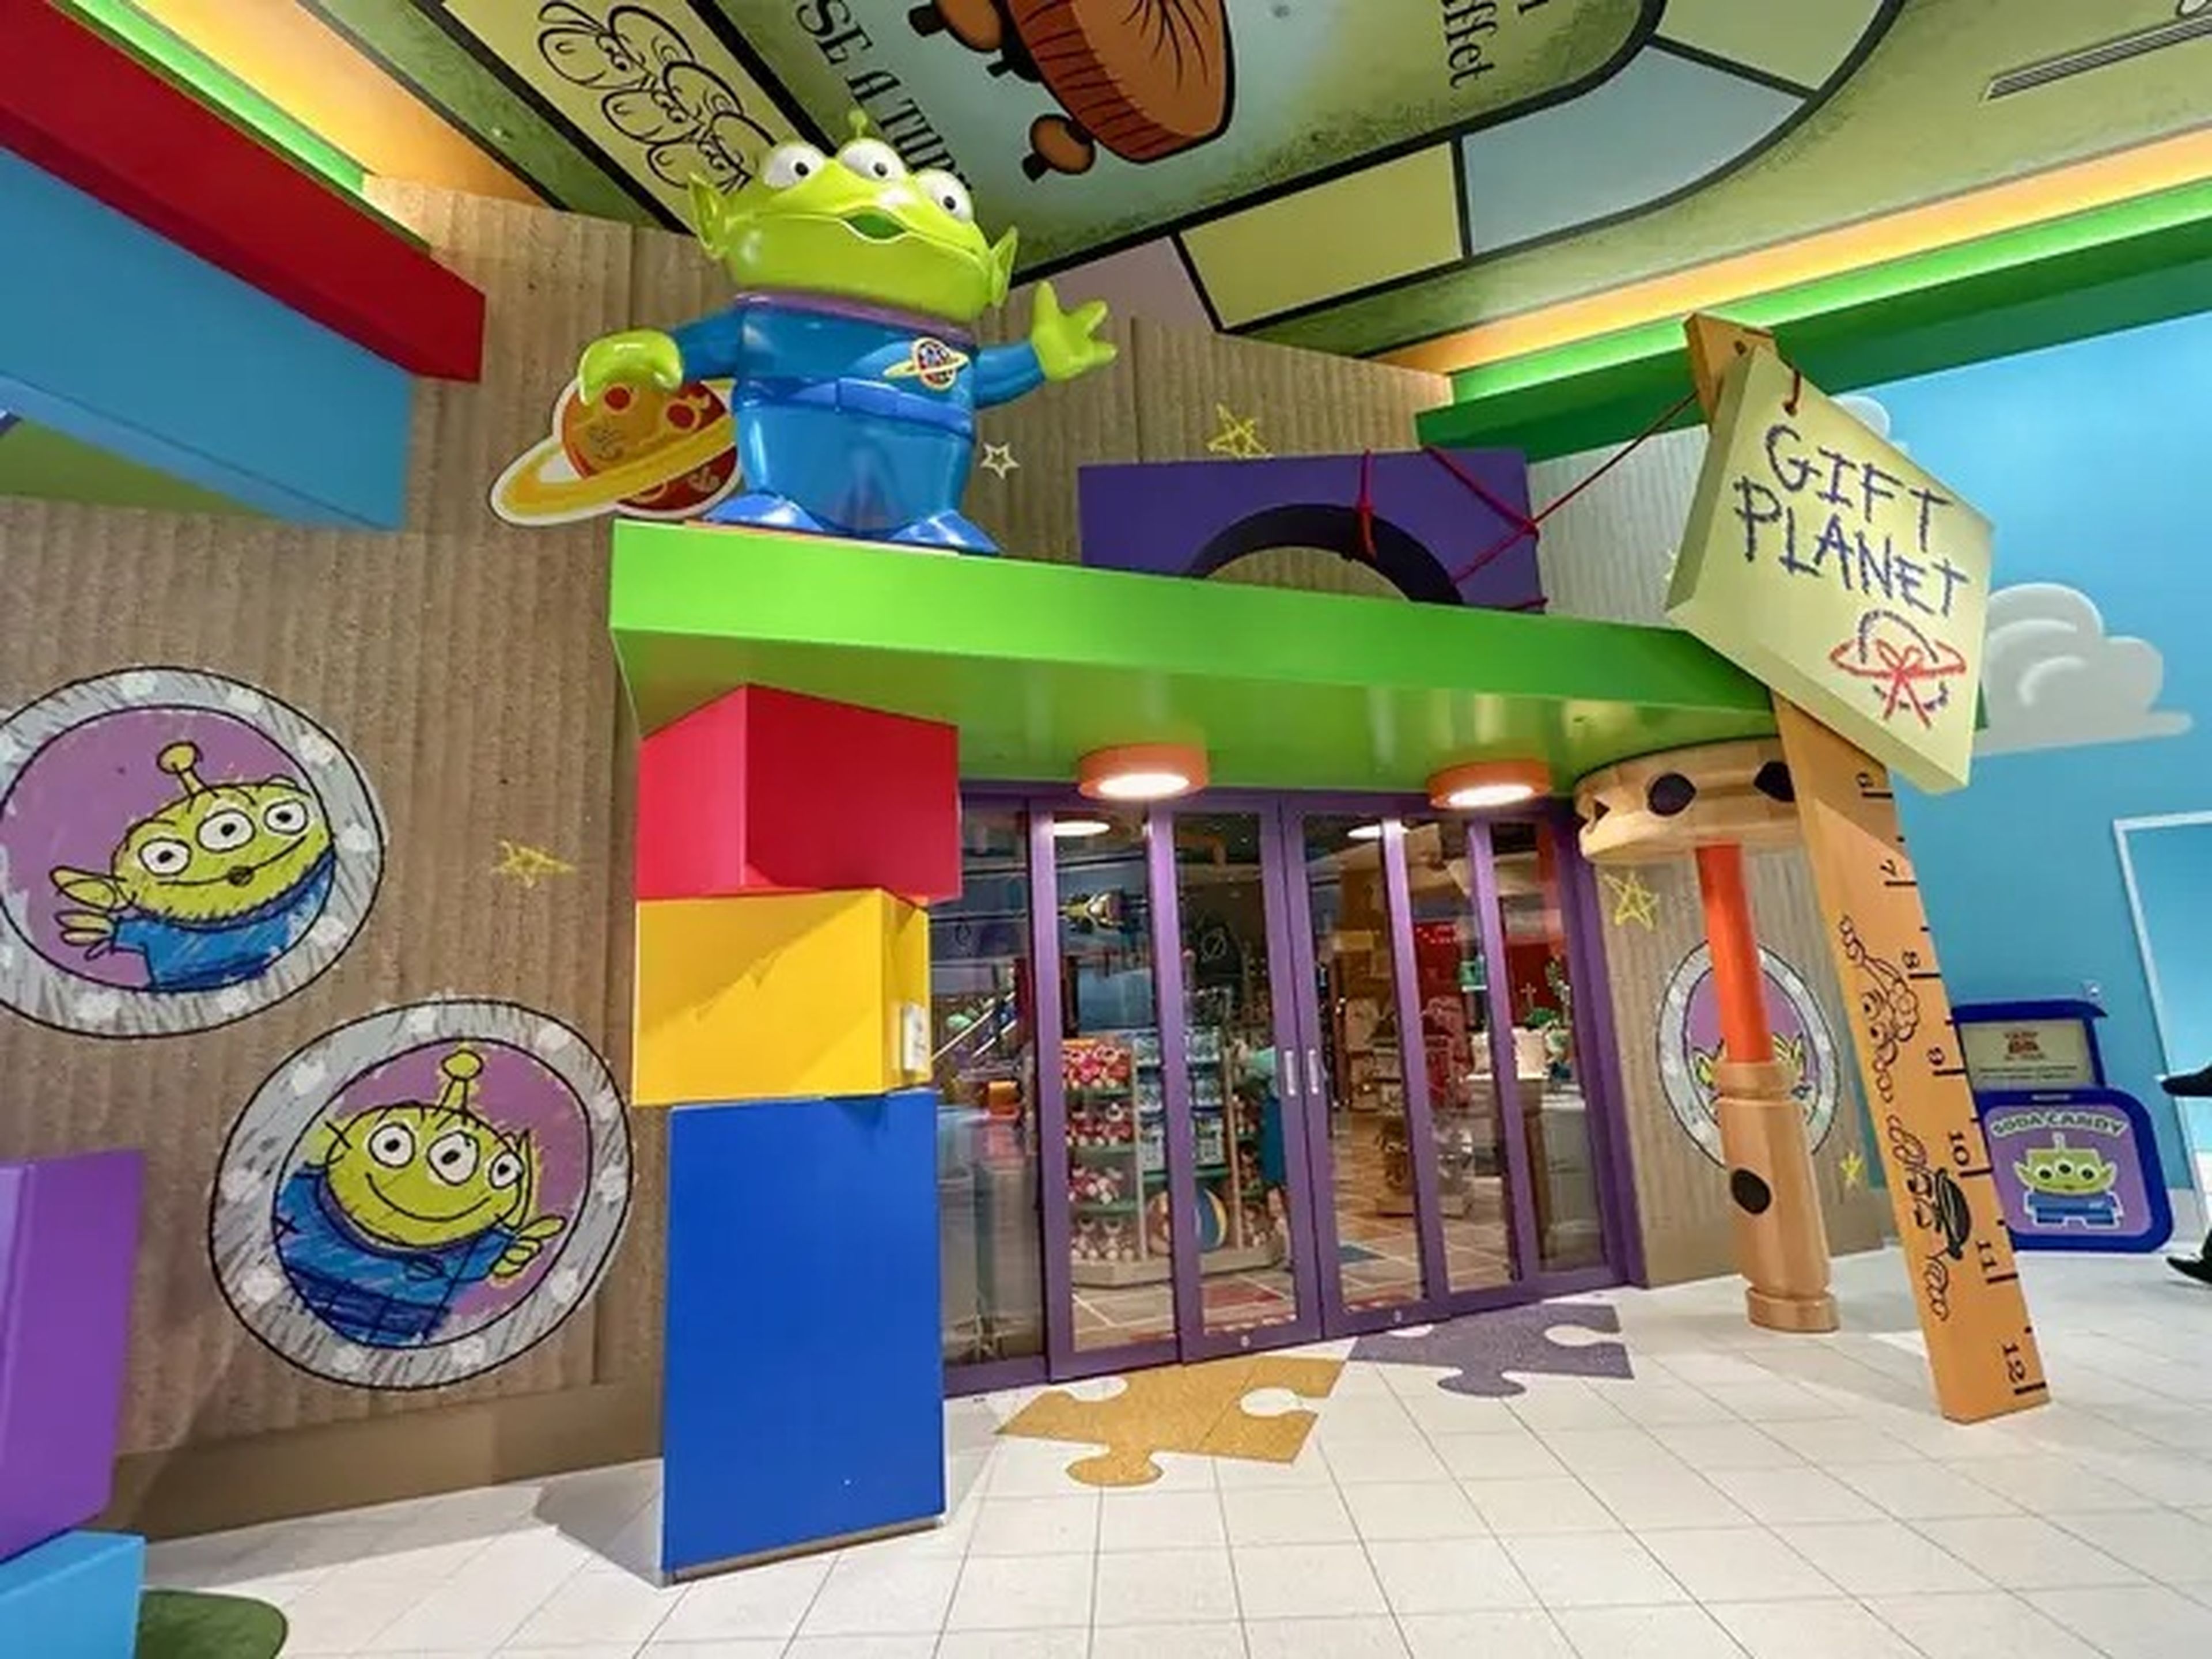 The exterior of the gift shop at the Toy Story Hotel in Tokyo showing a sign that reads, "Gift Planet."